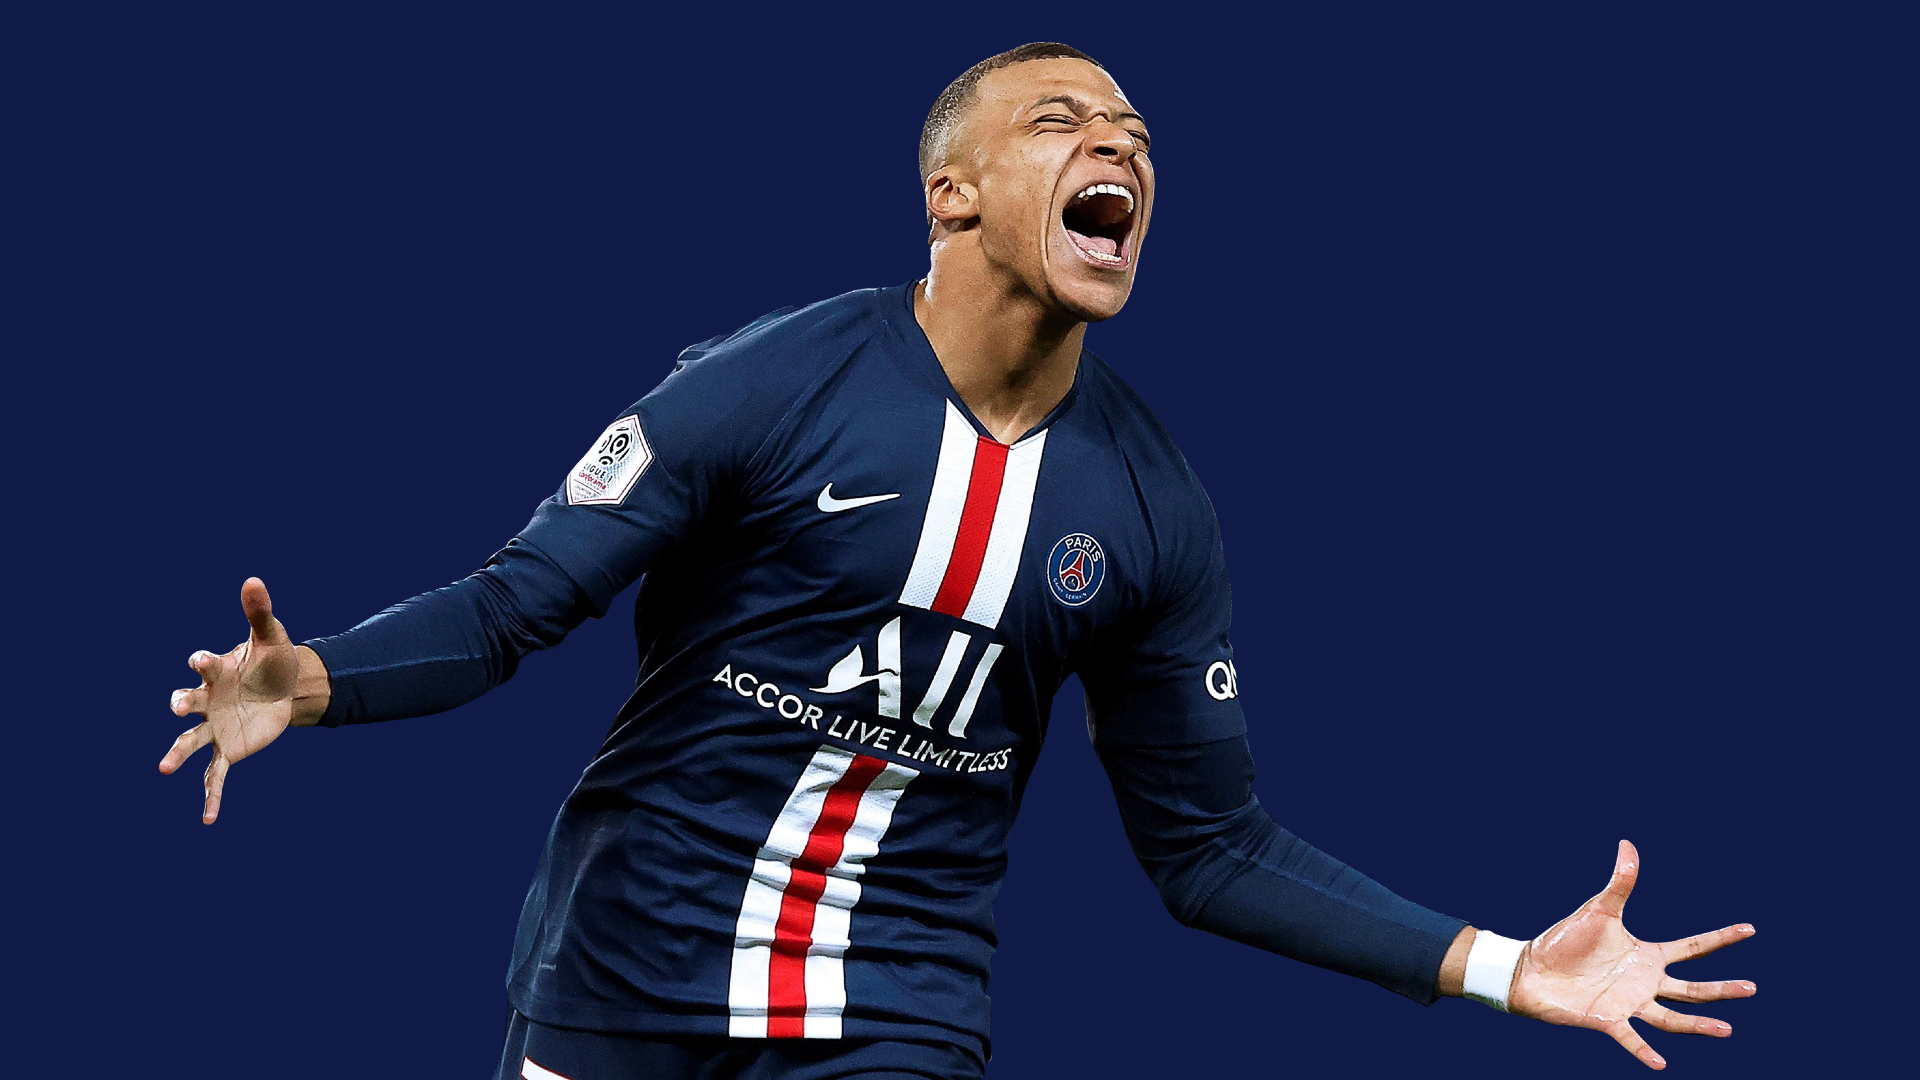 Kylian Mbappé Will Now Earn $215,000 A Day With PSG